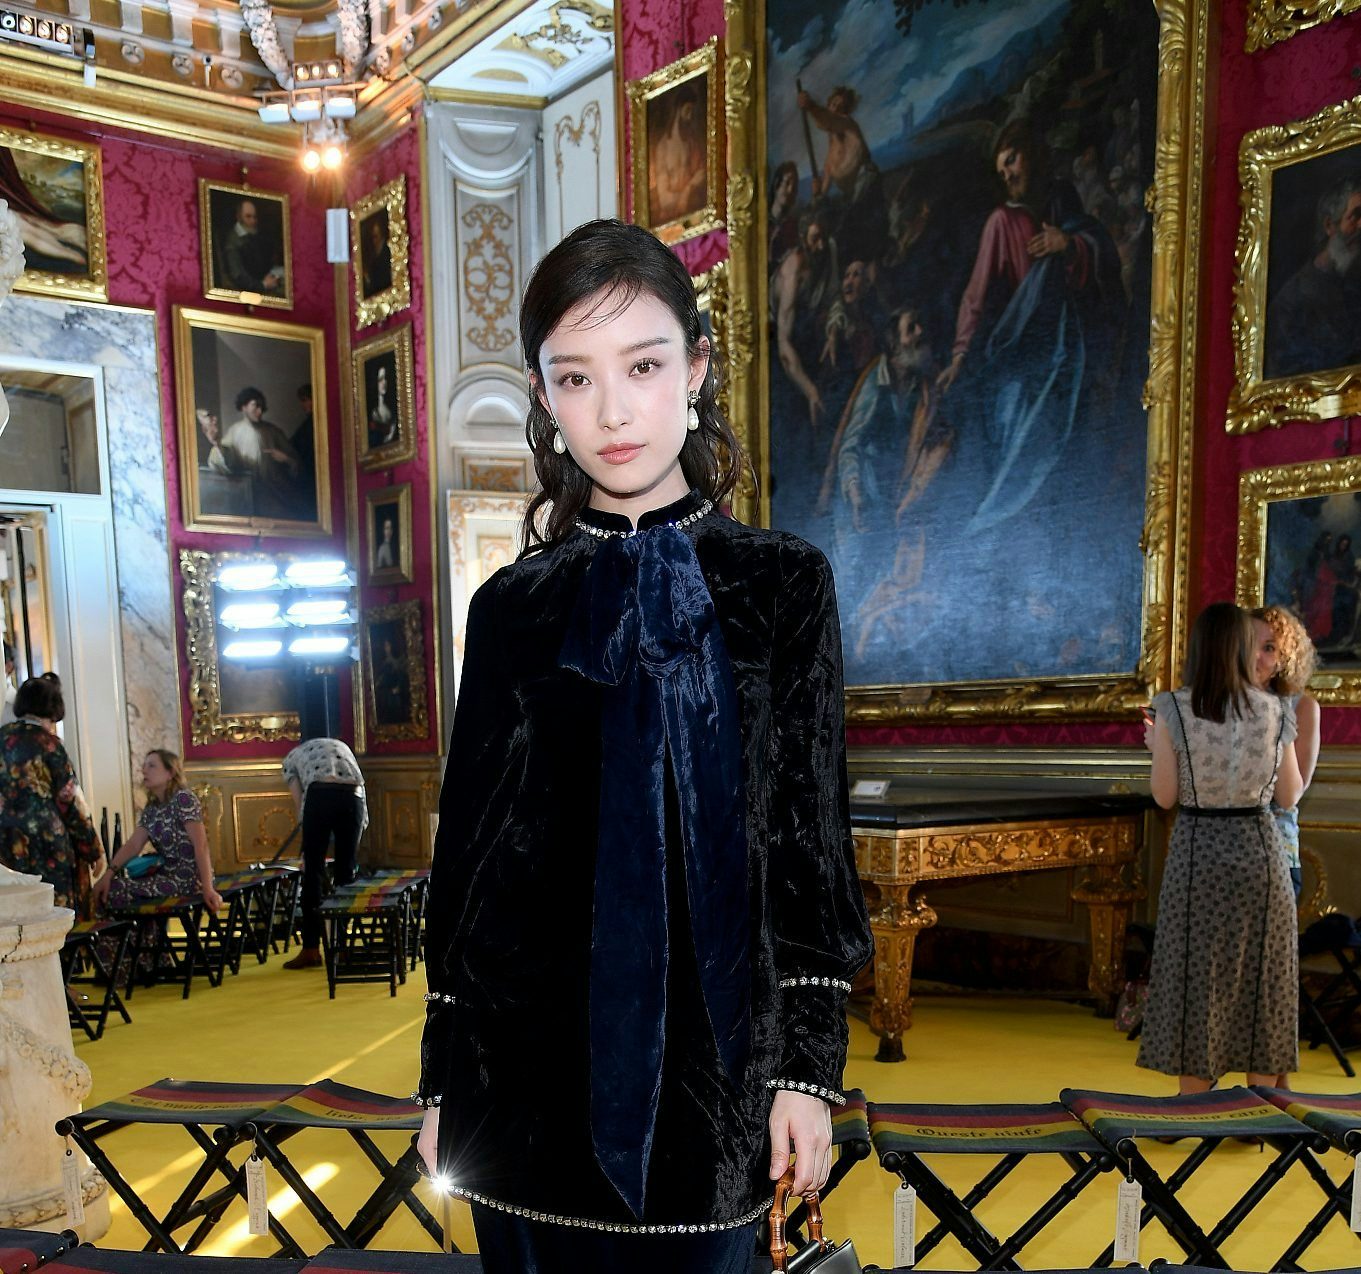 Gucci’s Pitti Palace Show Sees More Chinese Fashion Bloggers Than Celebrities